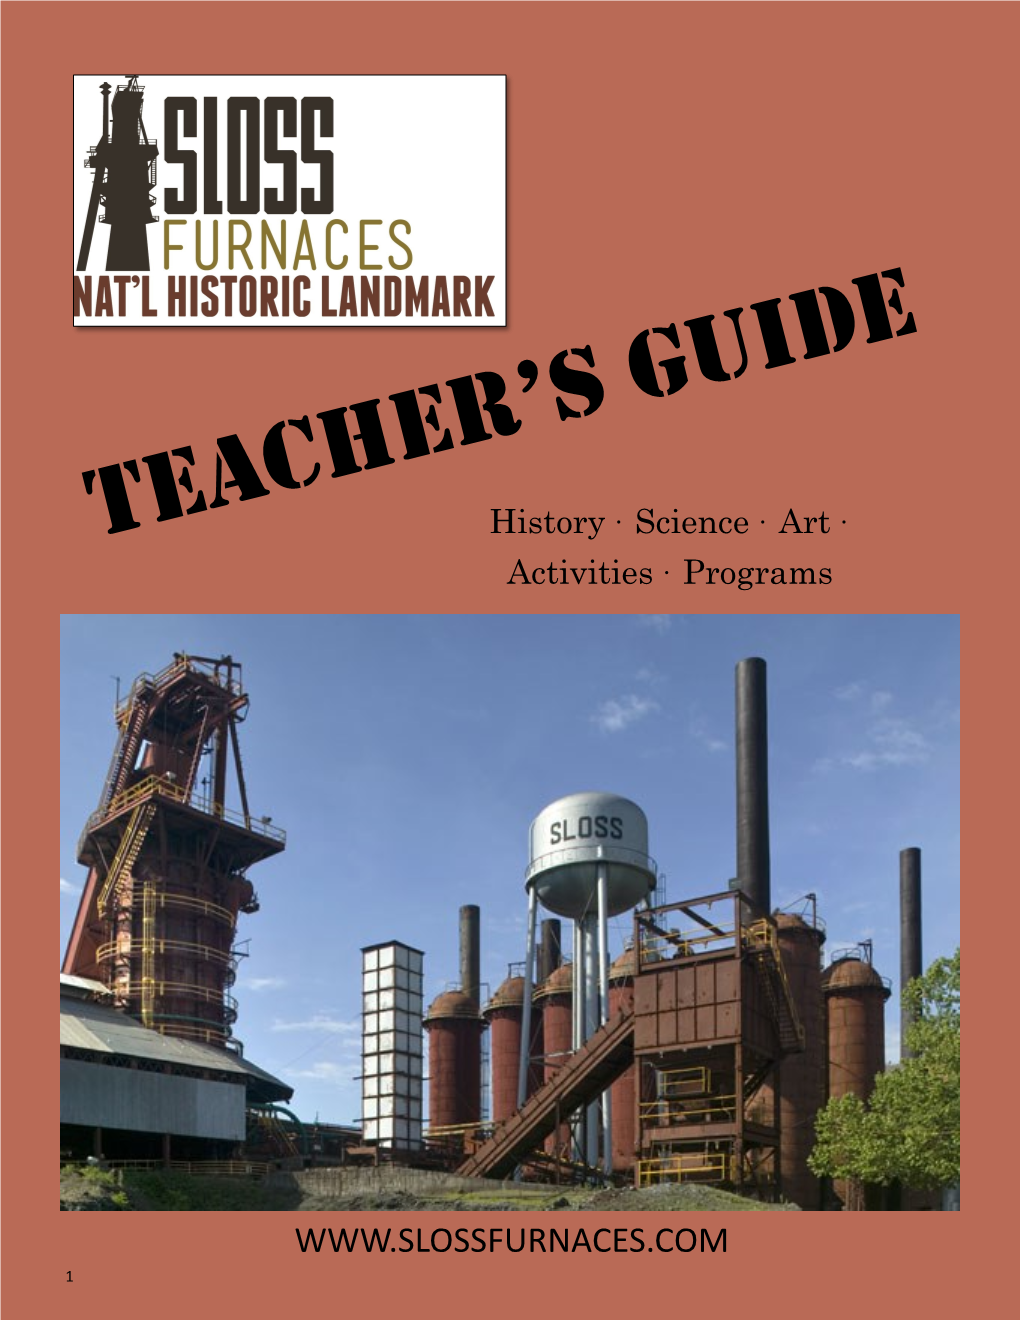 The Technology of Sloss Furnaces